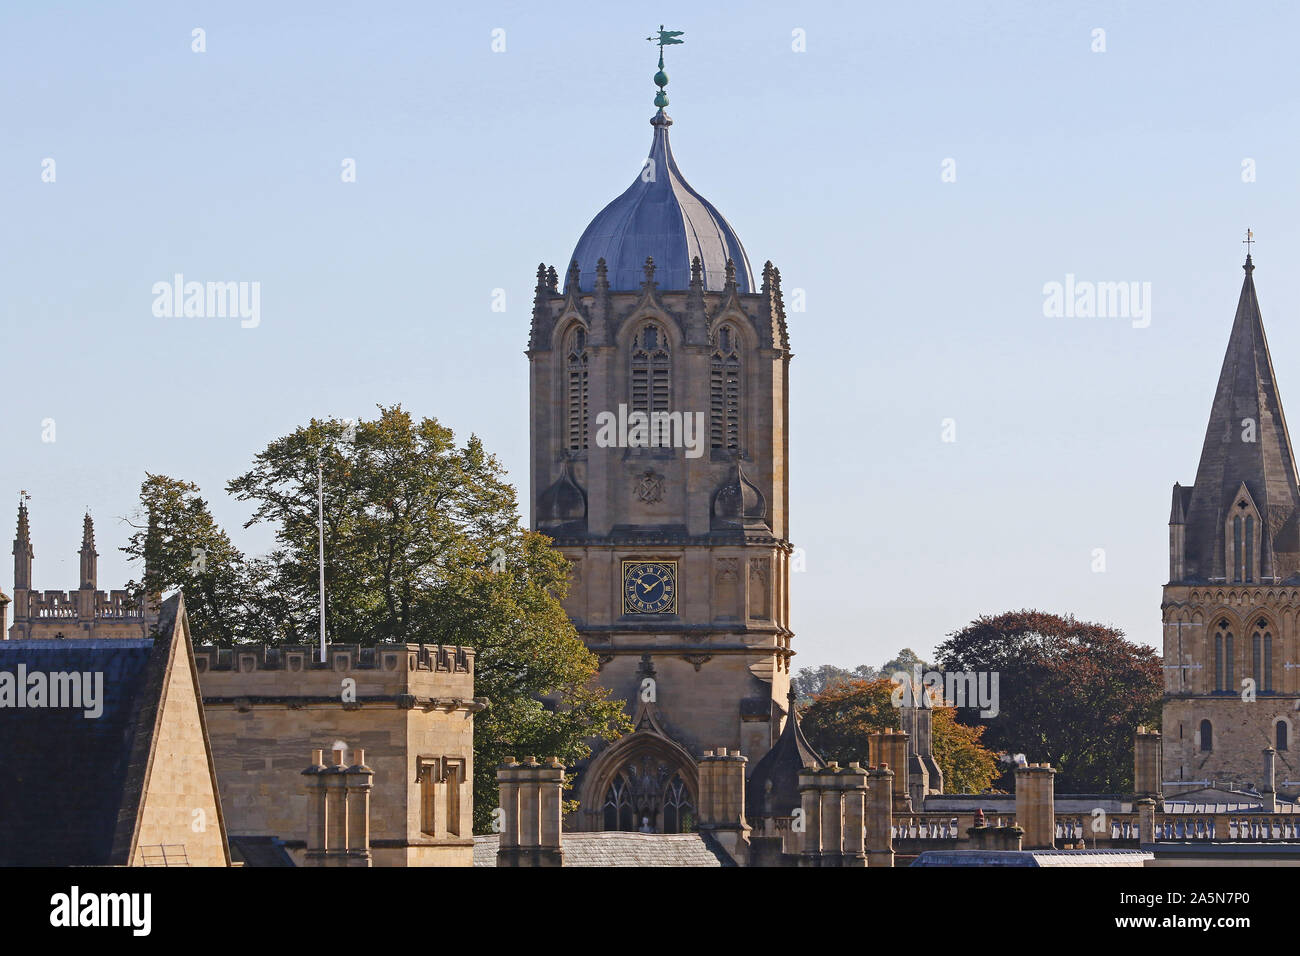 The bell tower called Tom Tower at an entrance to Christ Church college Oxford, seen from the Westgate. The clock always runs 5 minutes slow Stock Photo